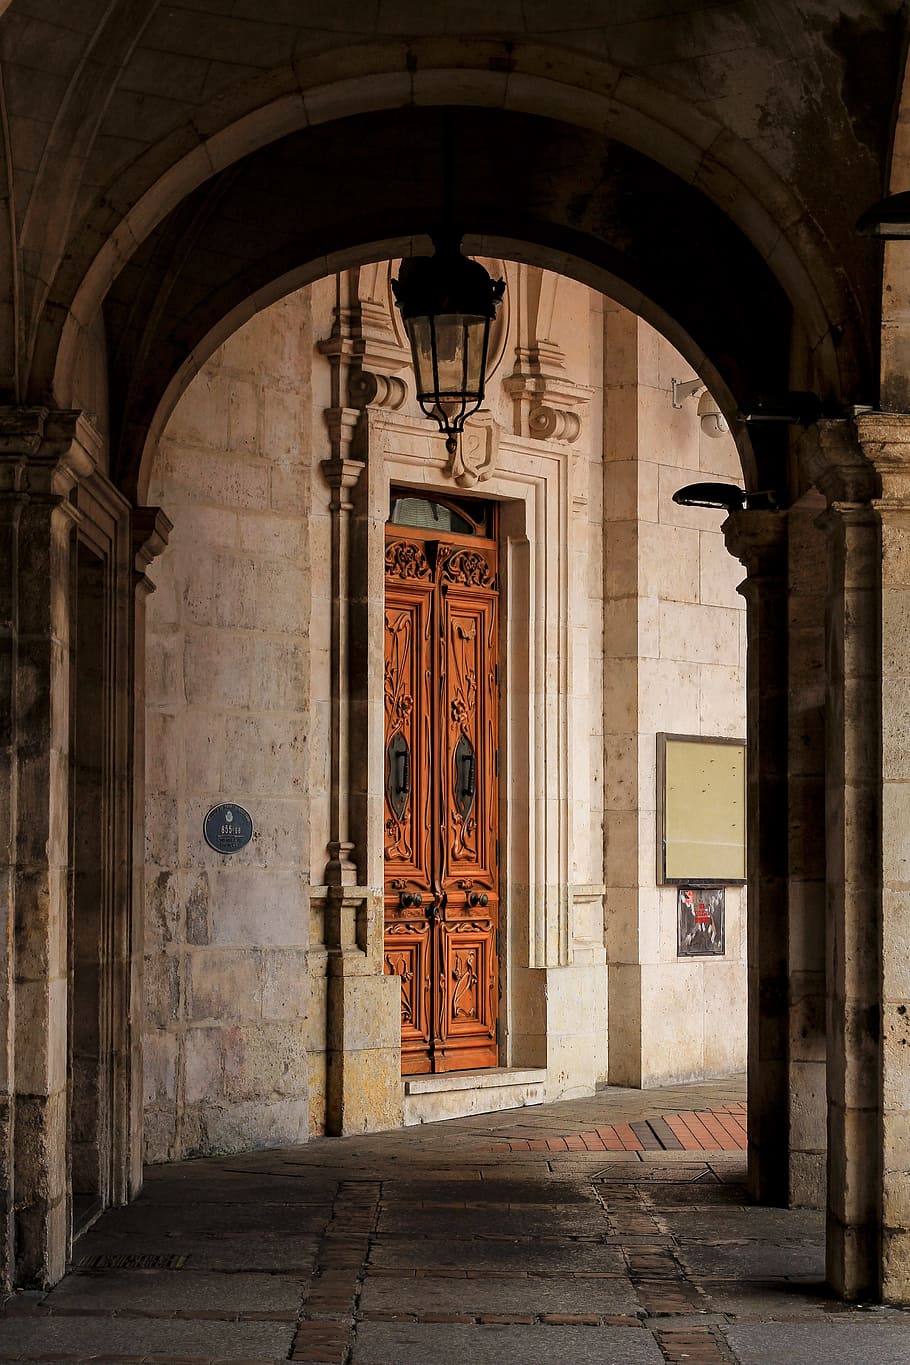 architecture, travel, old, building, door, city, house, stone, gothic, cathedral